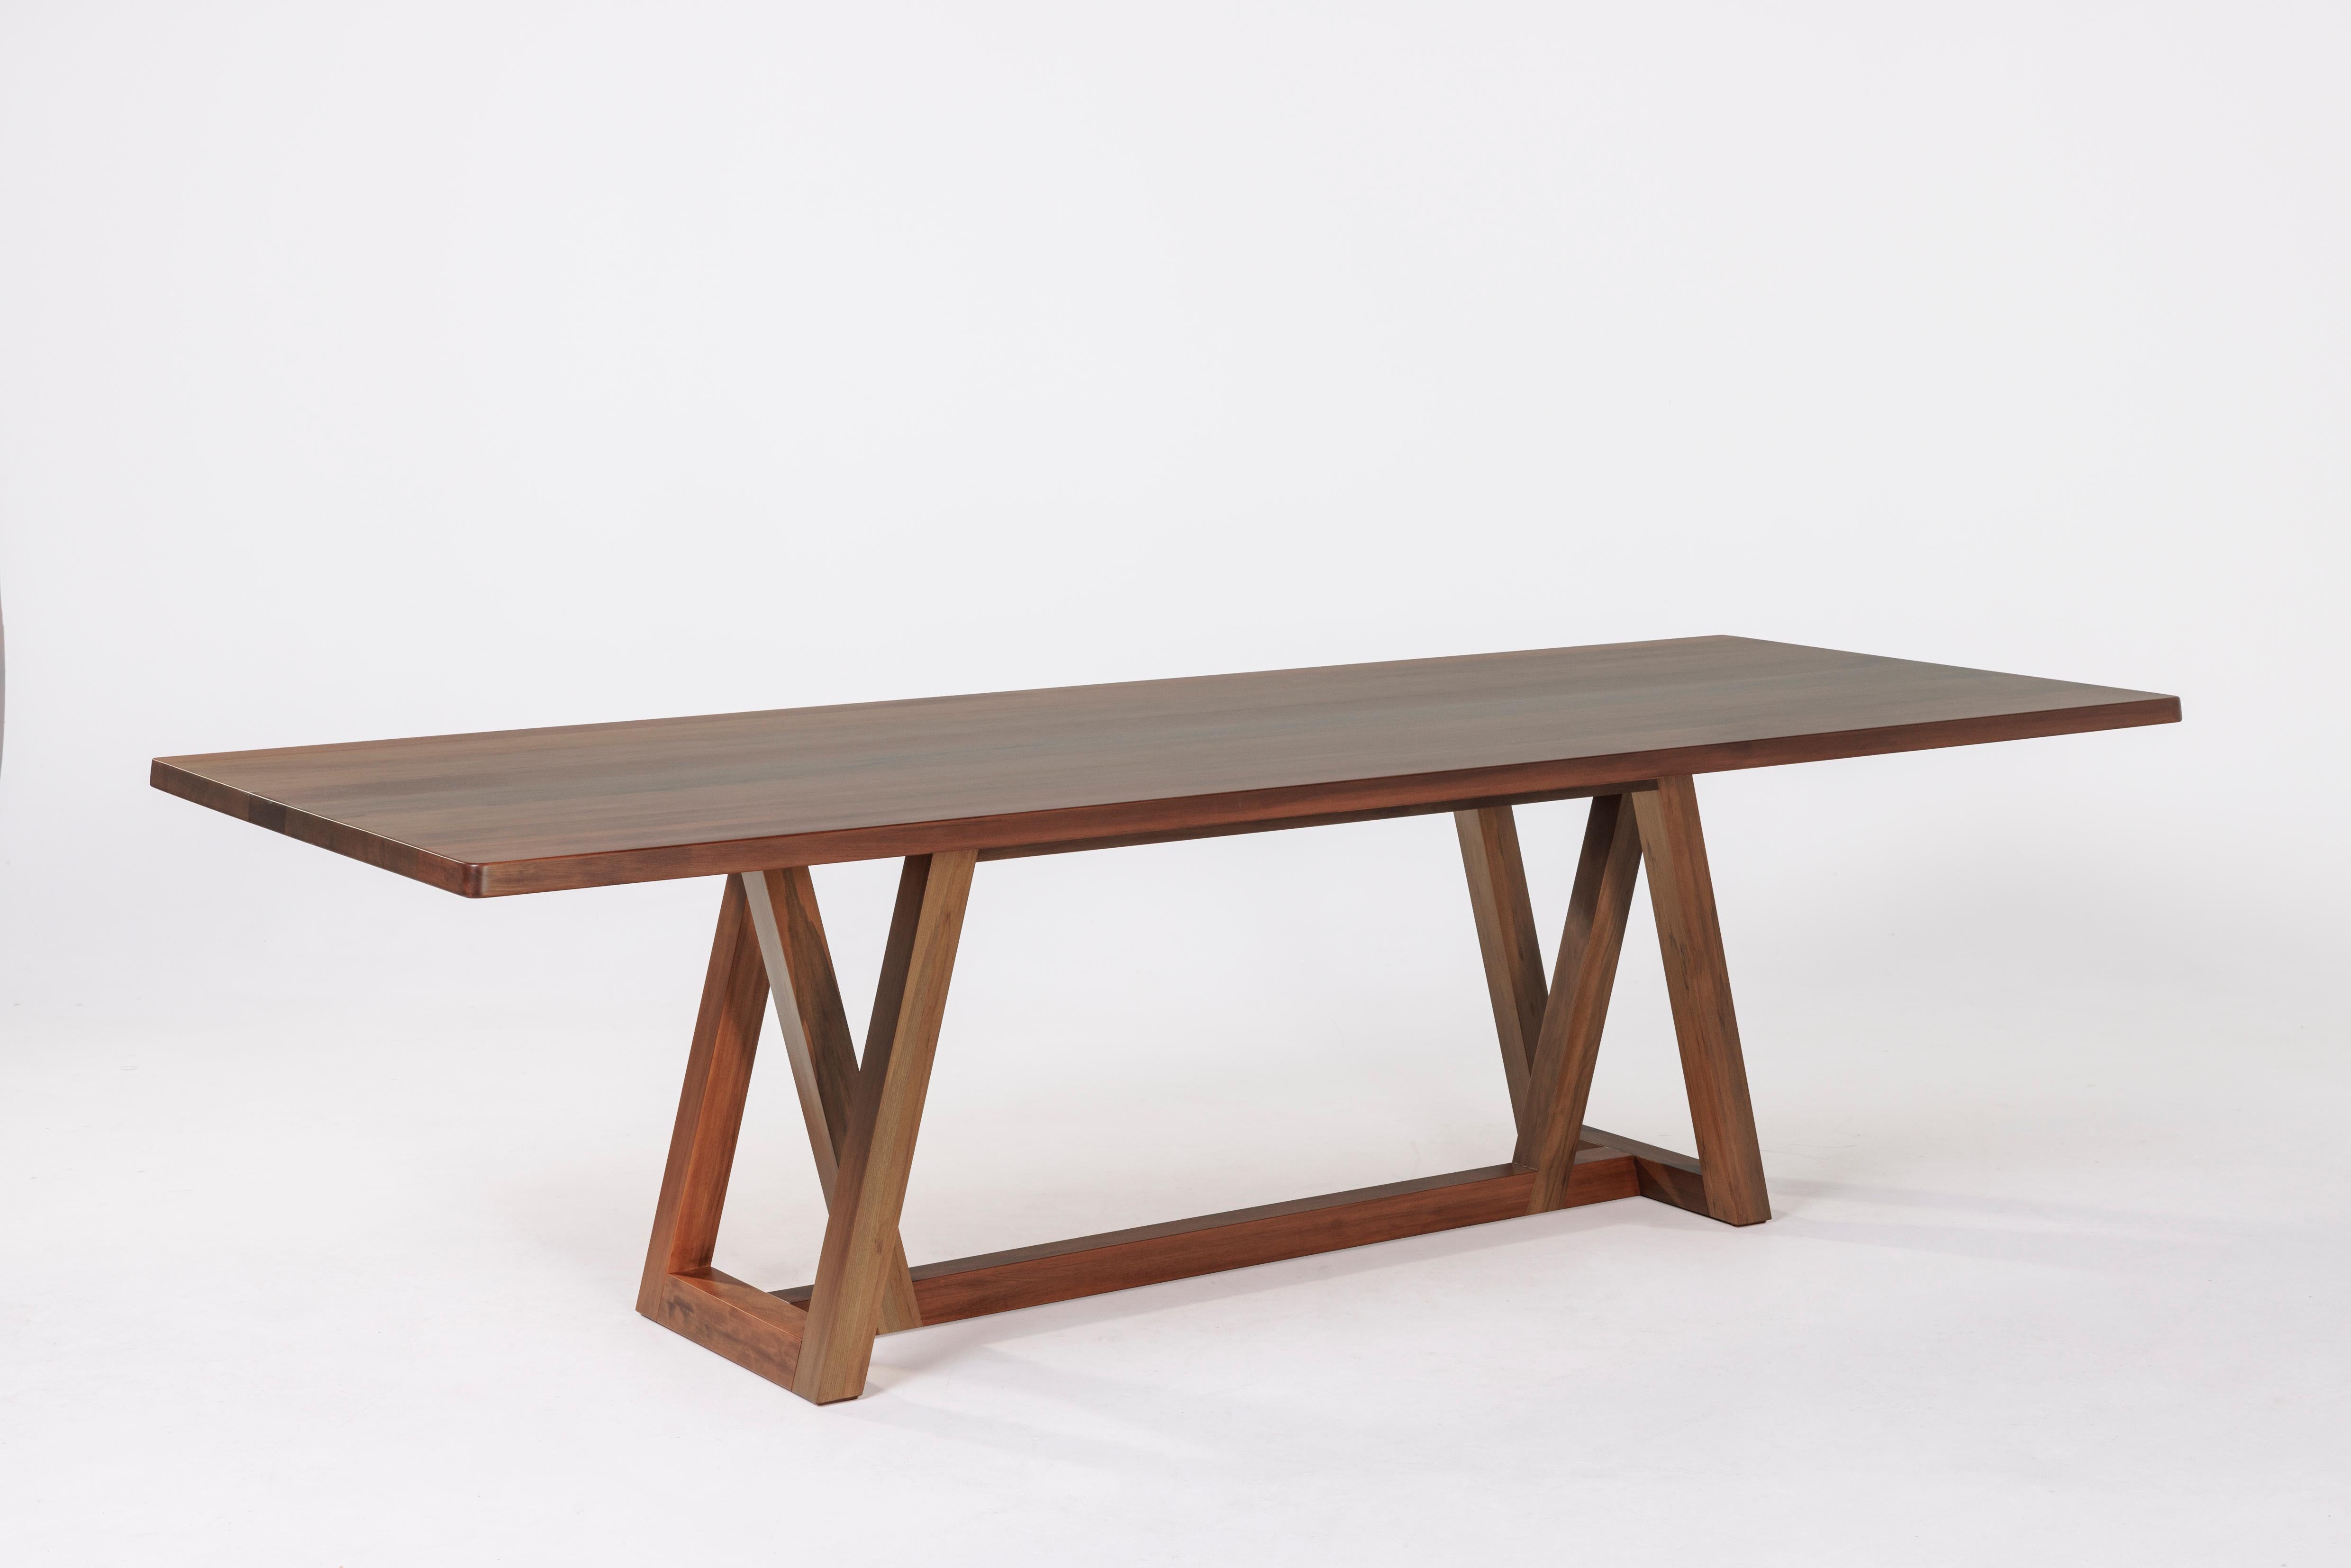 New Zealand Luxury Modern Table Made from Sustainable Ancient River Rescued Wood For Sale